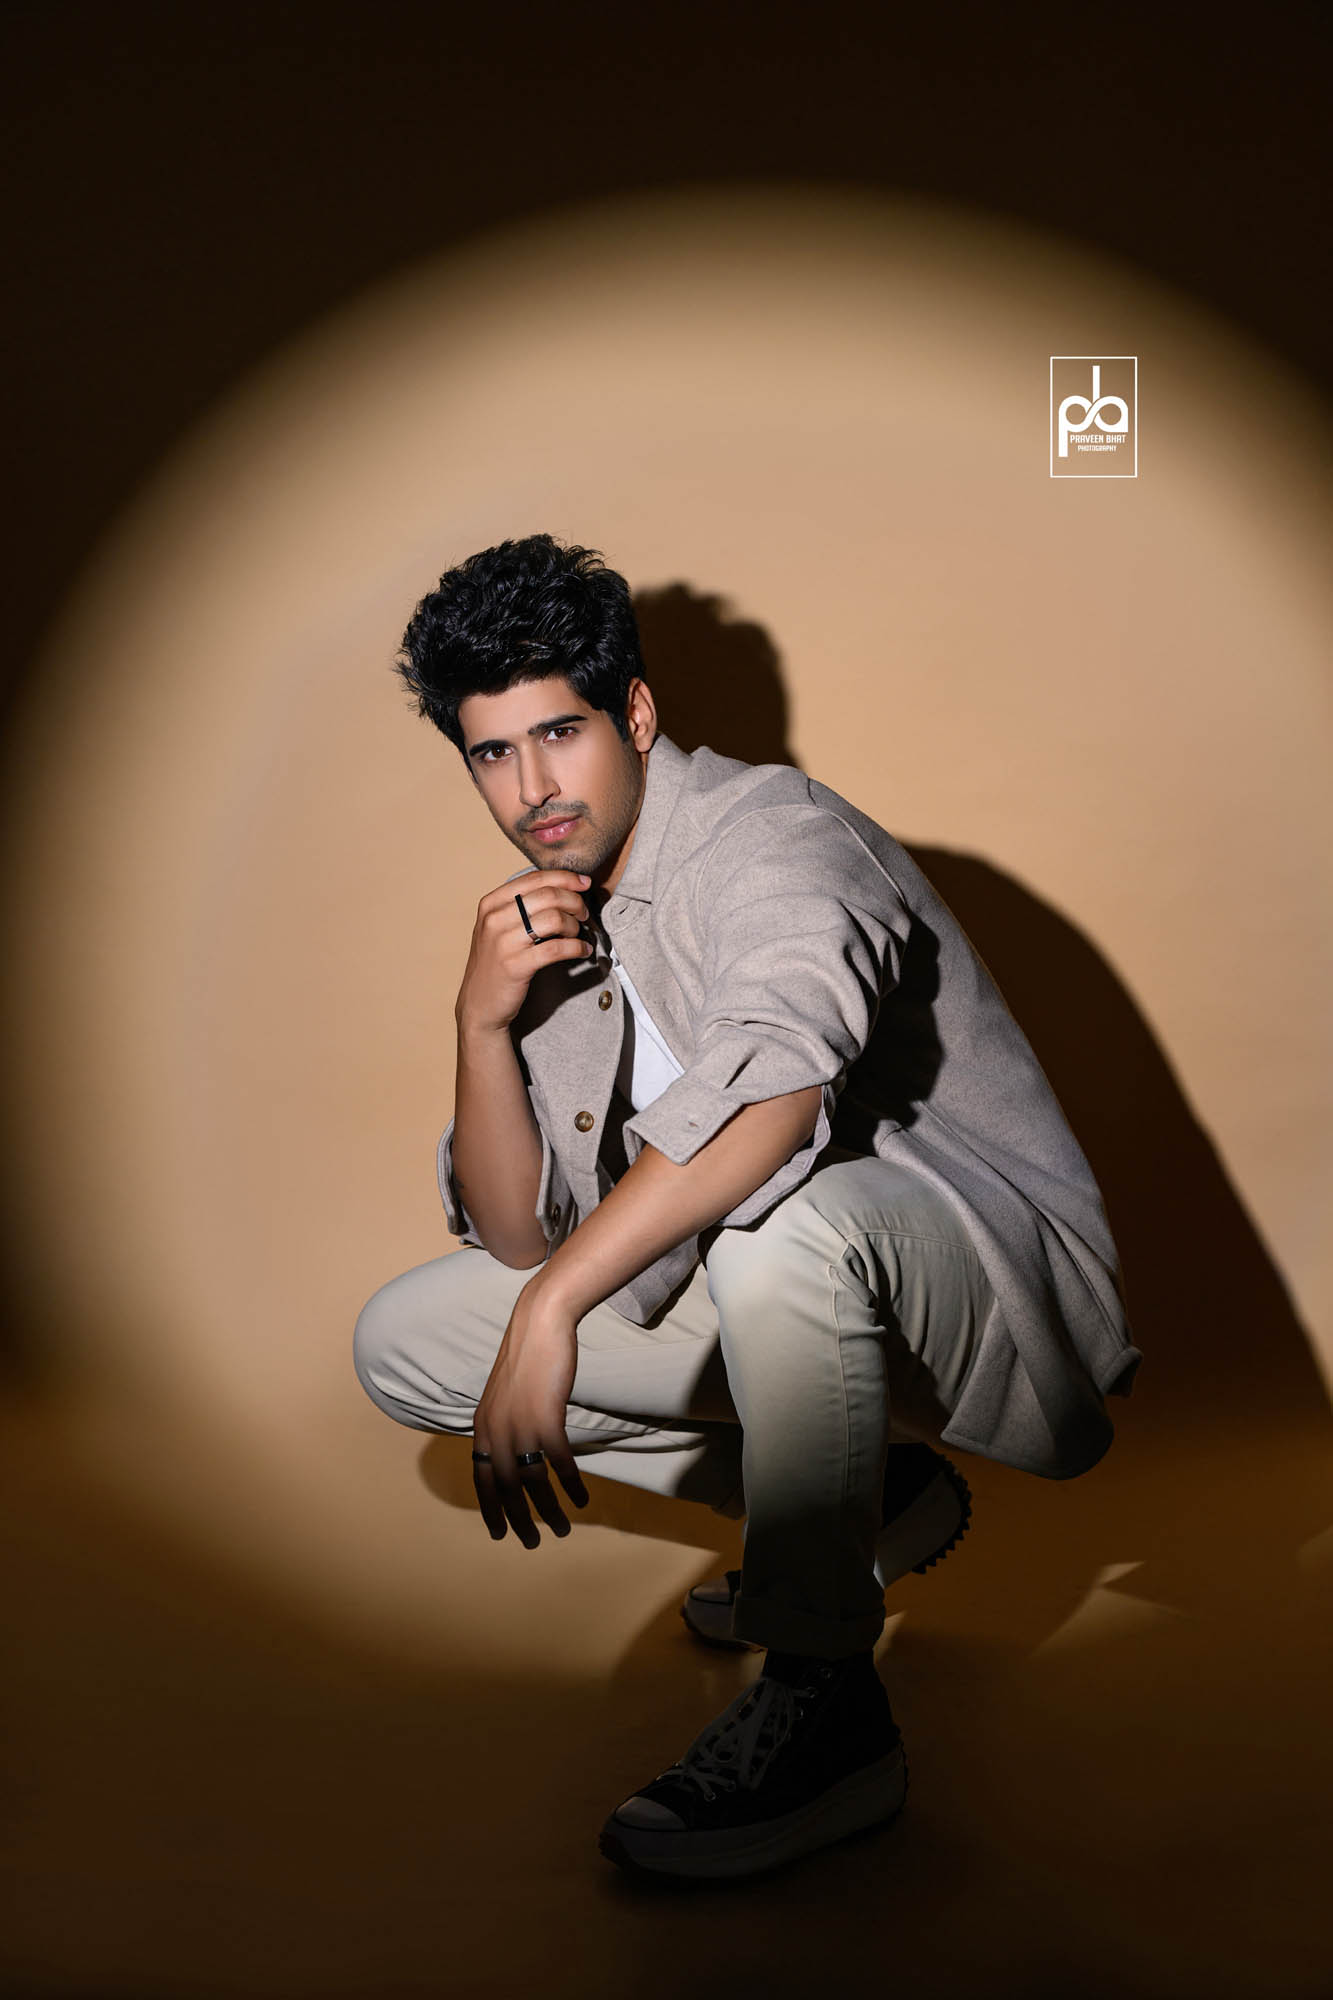 Image of Young Indian Male Model Wearing Suite Posing Over Grunge Wall  Background-HB642318-Picxy